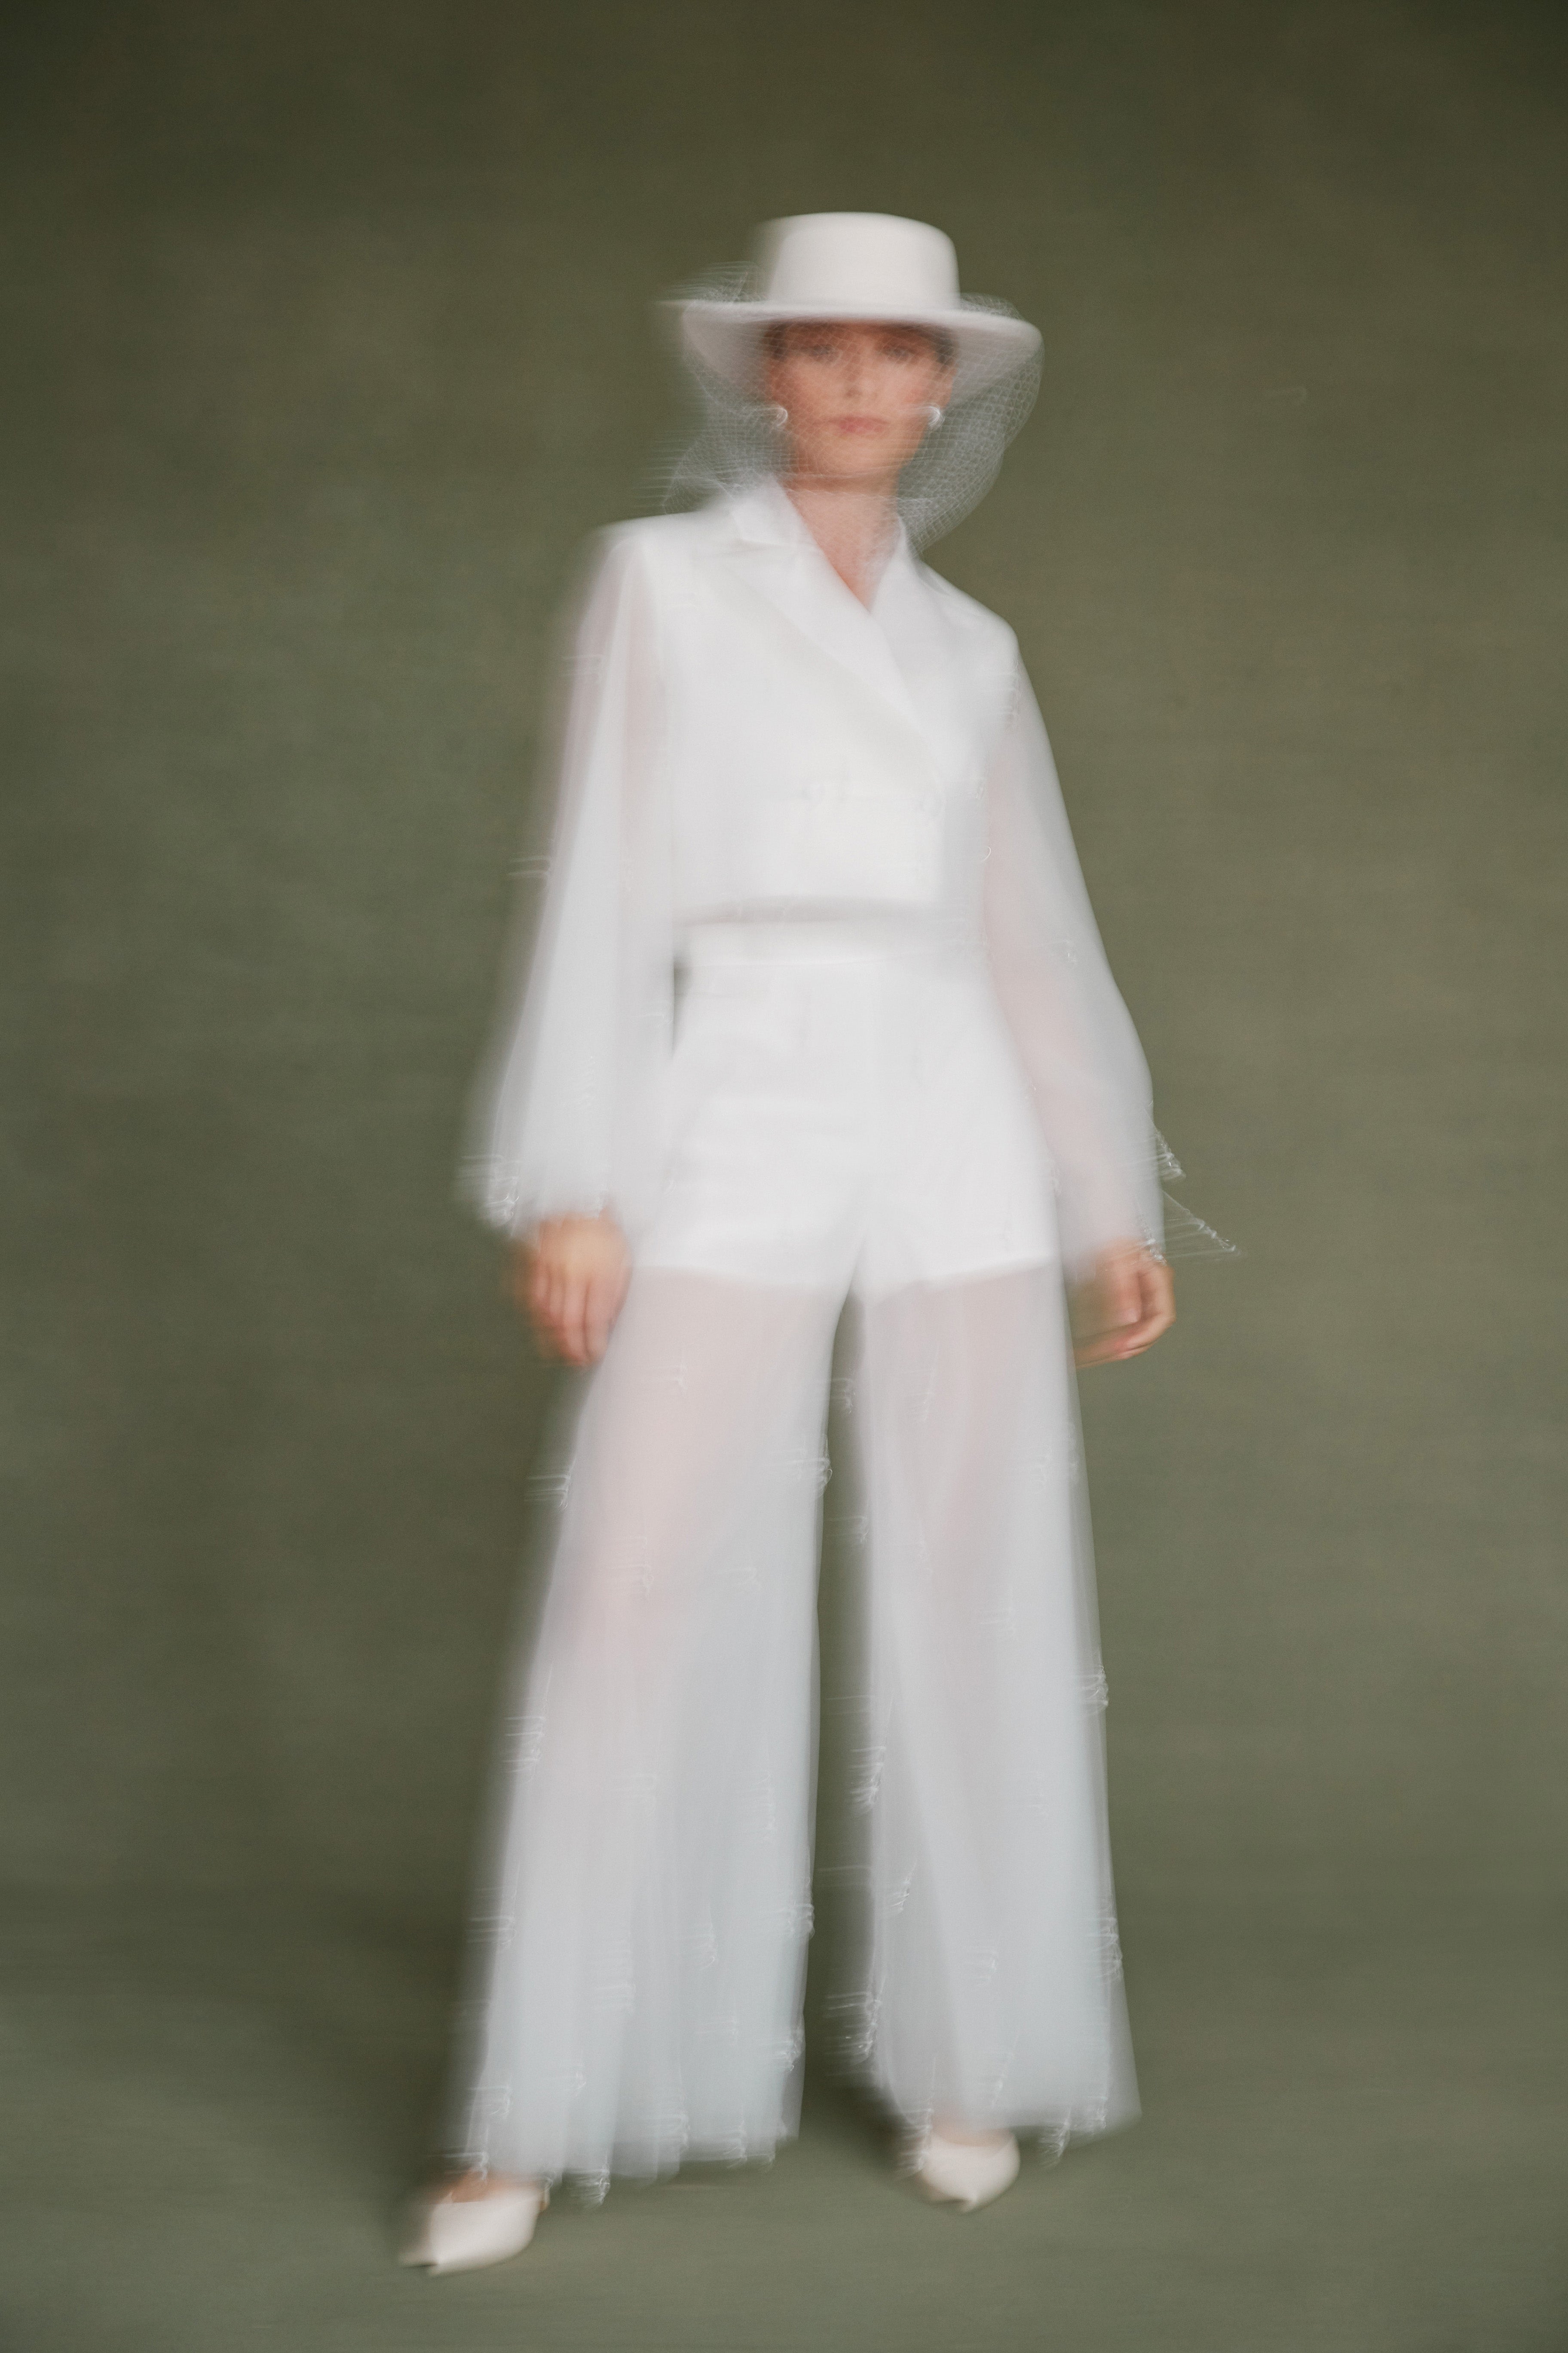 Alexandra Pijut Tulle Blazer in ivory with crystal beading. Wedding suit, bridal, bride, city hall outfit. 